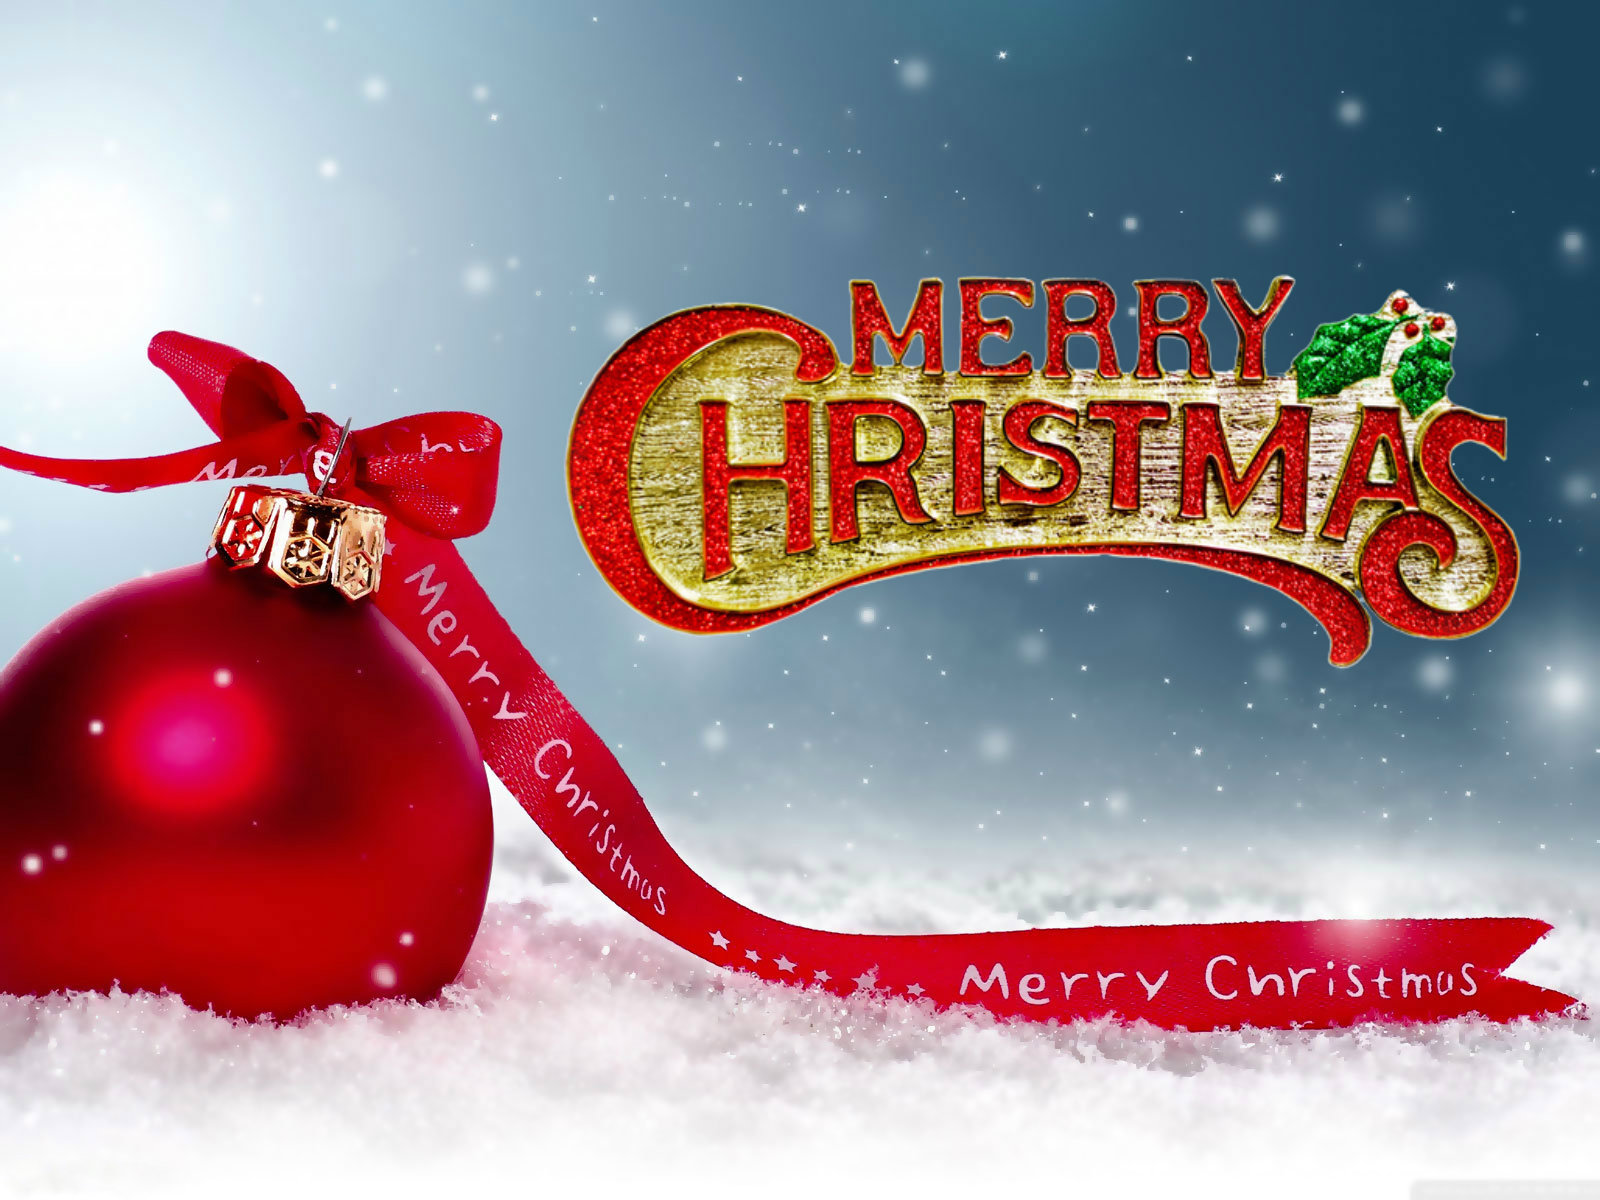 Free download Merry Christmas 2018 Wishes Quotes Images Wallpapers For